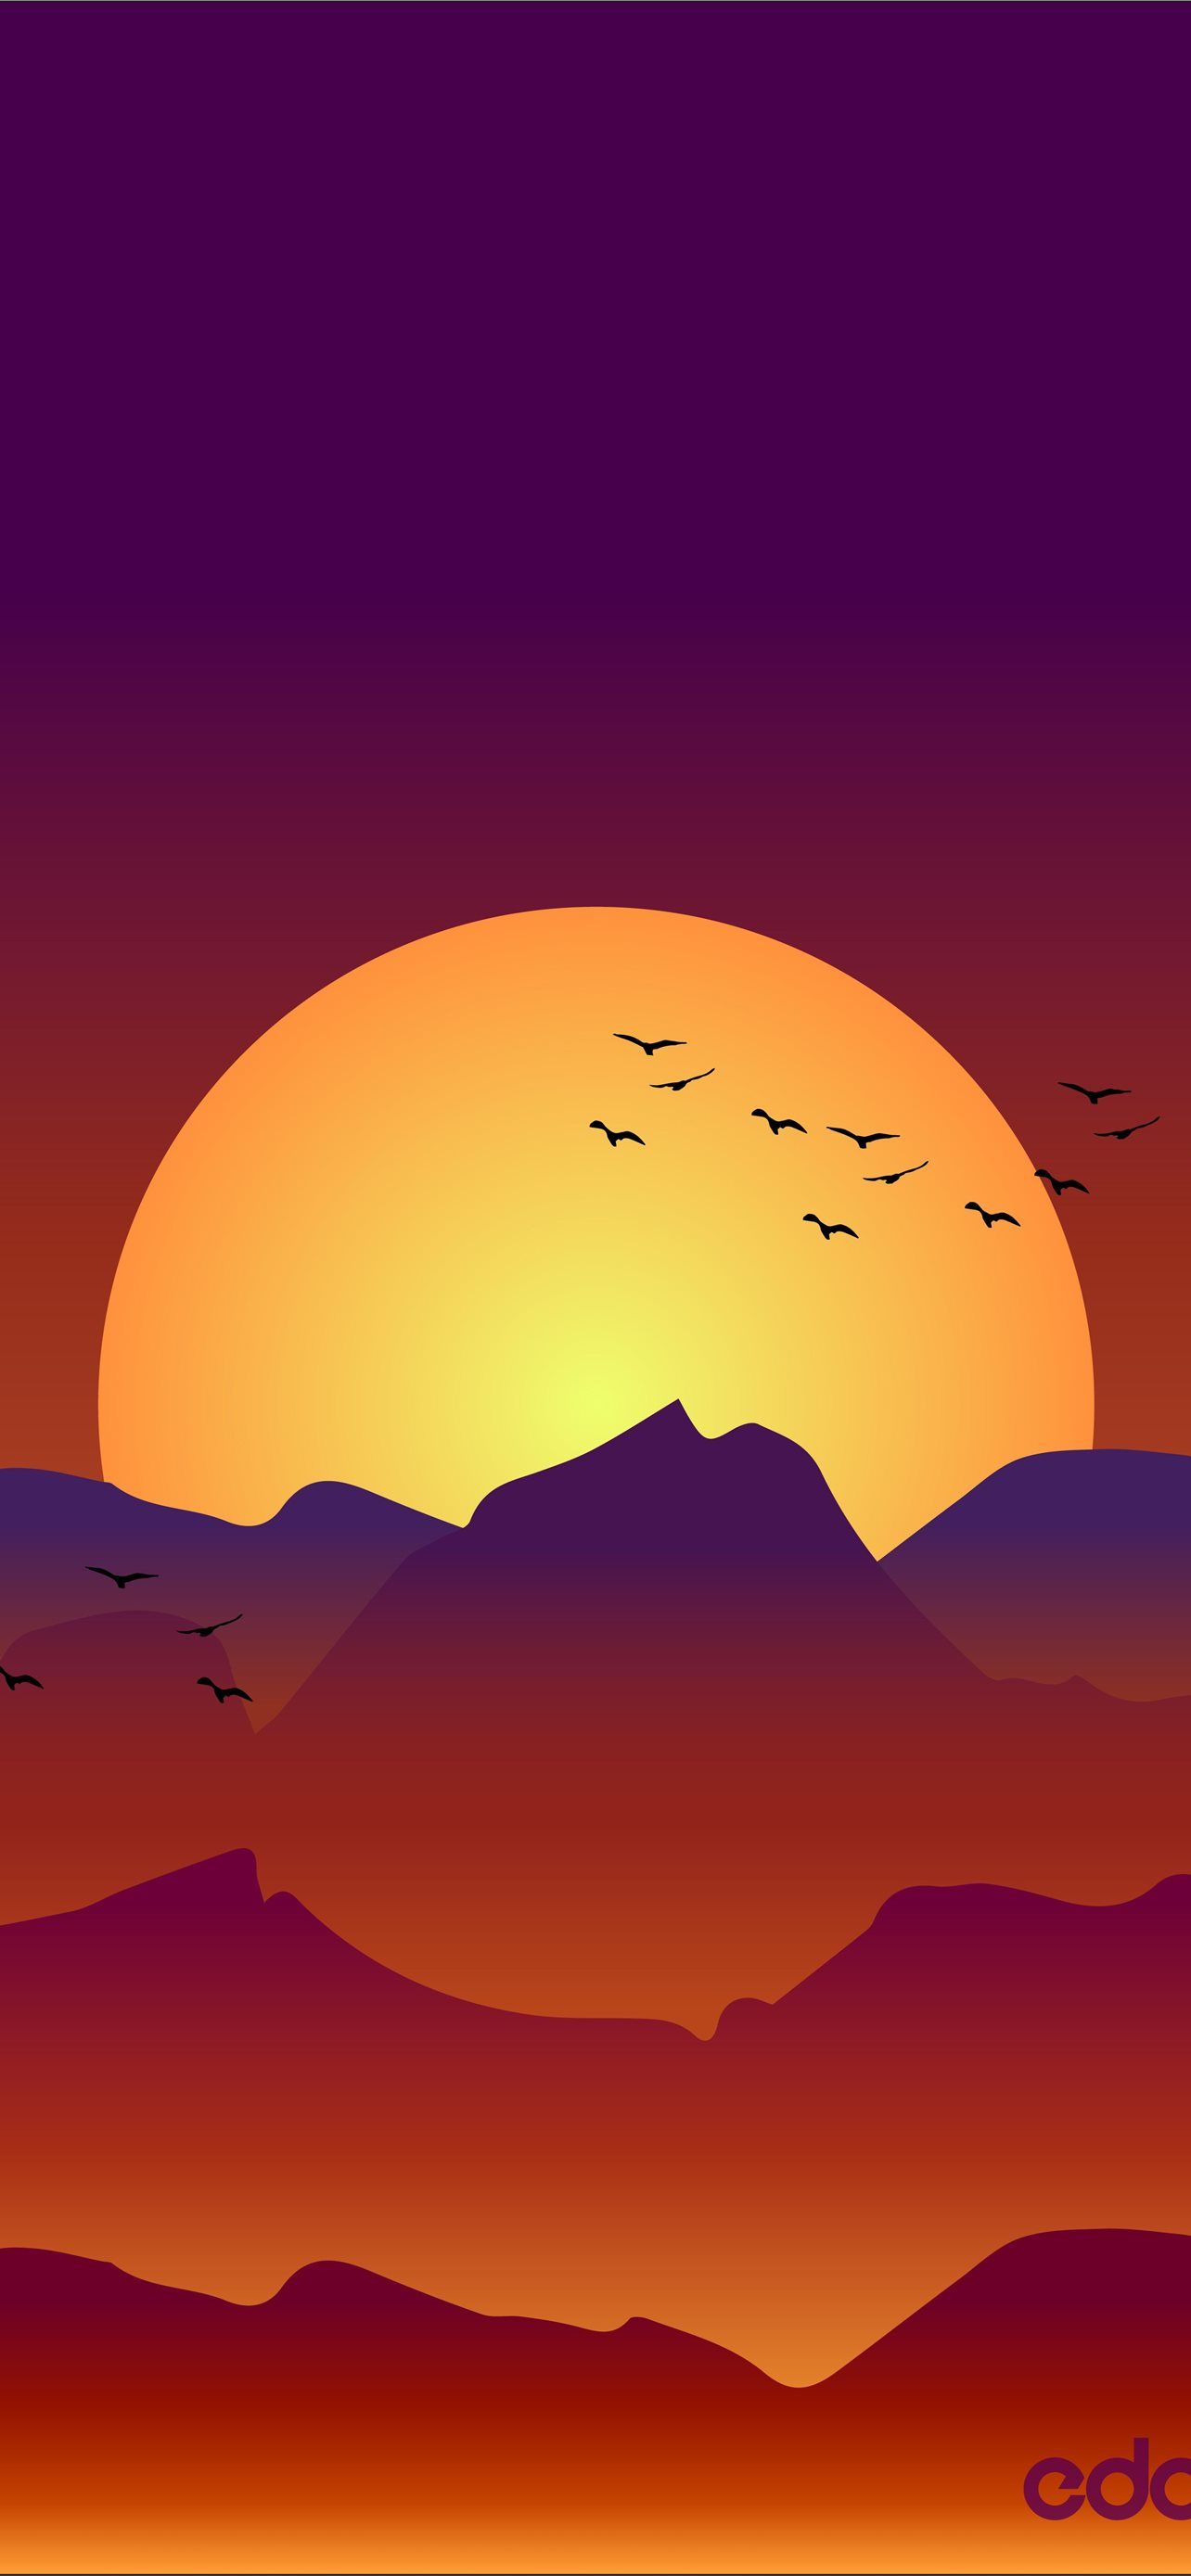 A beautiful sunset over the mountains with birds flying in the sky - Sunrise, sun